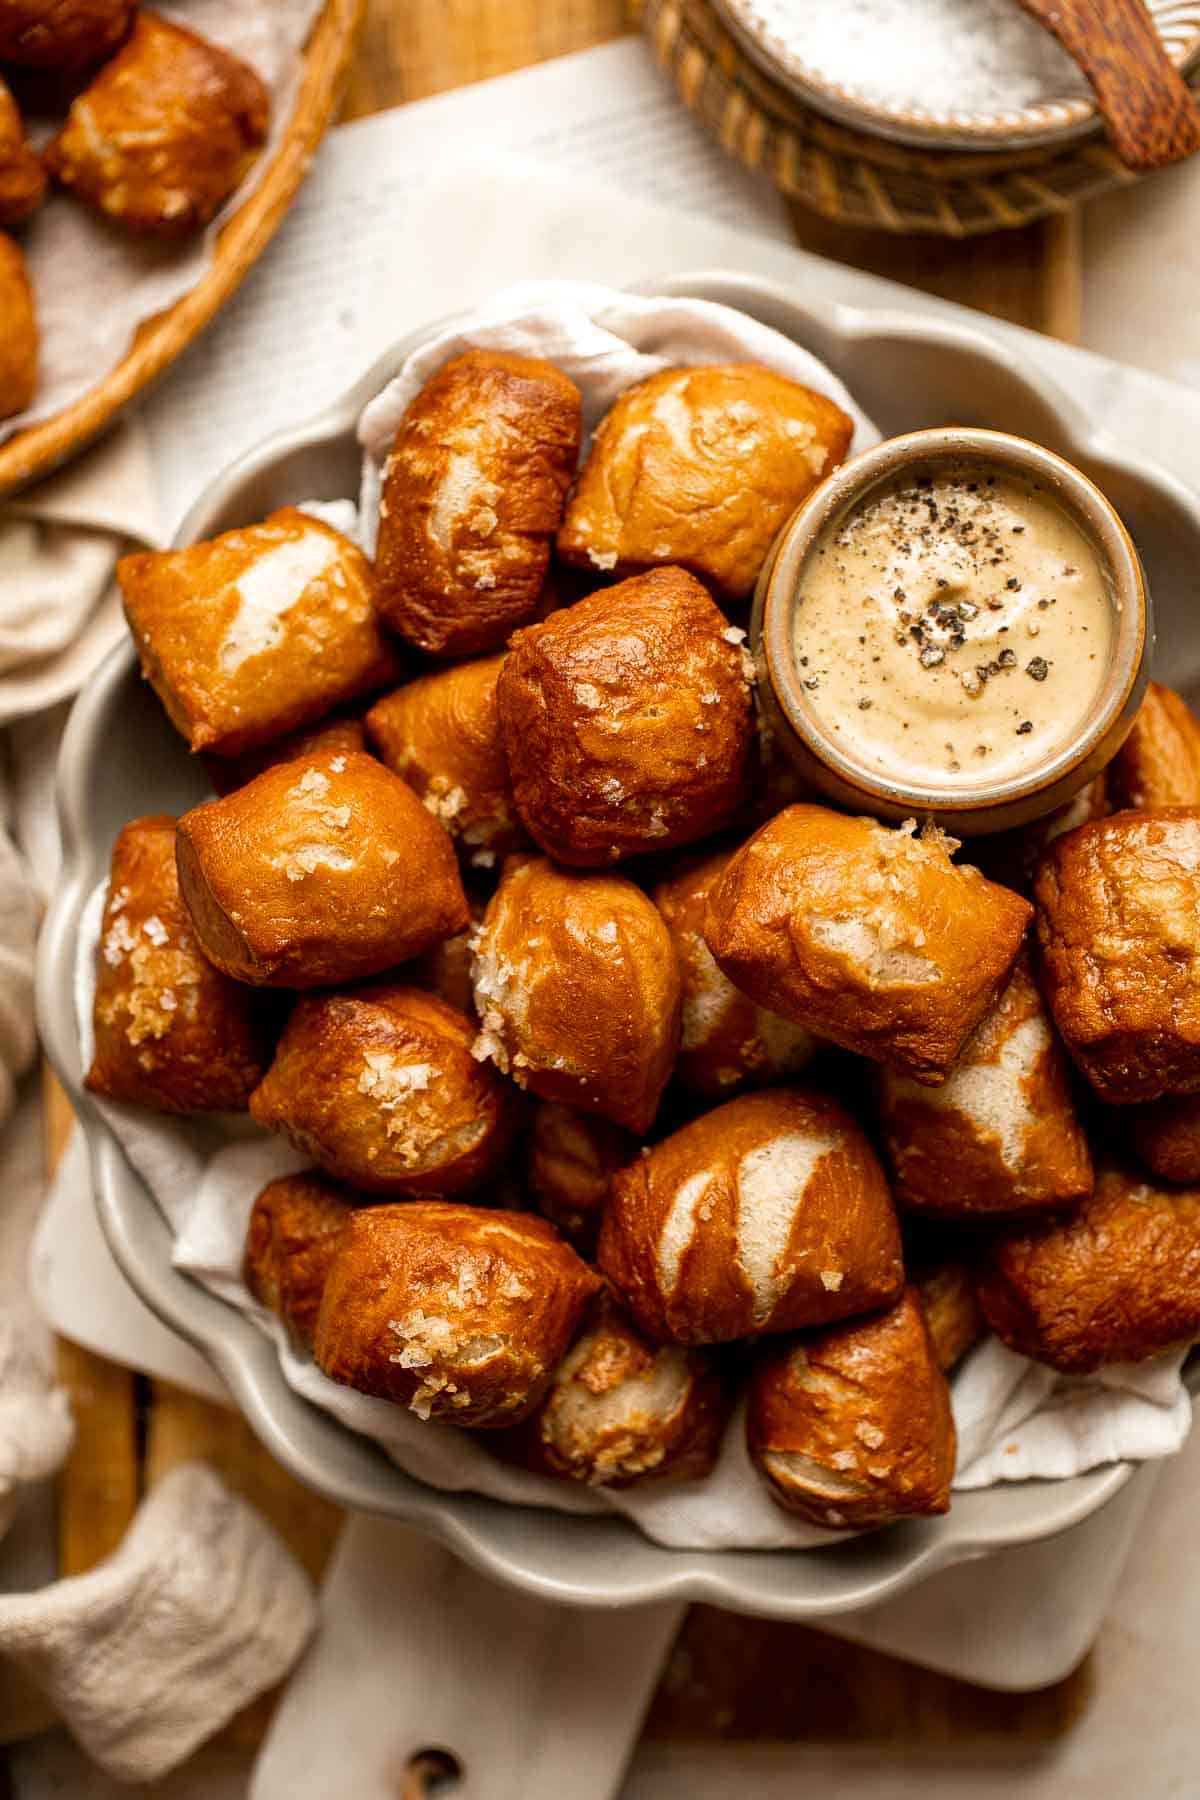 These tender, chewy homemade Pretzel Bites taste professionally made but are a beginner-friendly recipe you can easily make in the comfort of your own home. | aheadofthyme.com